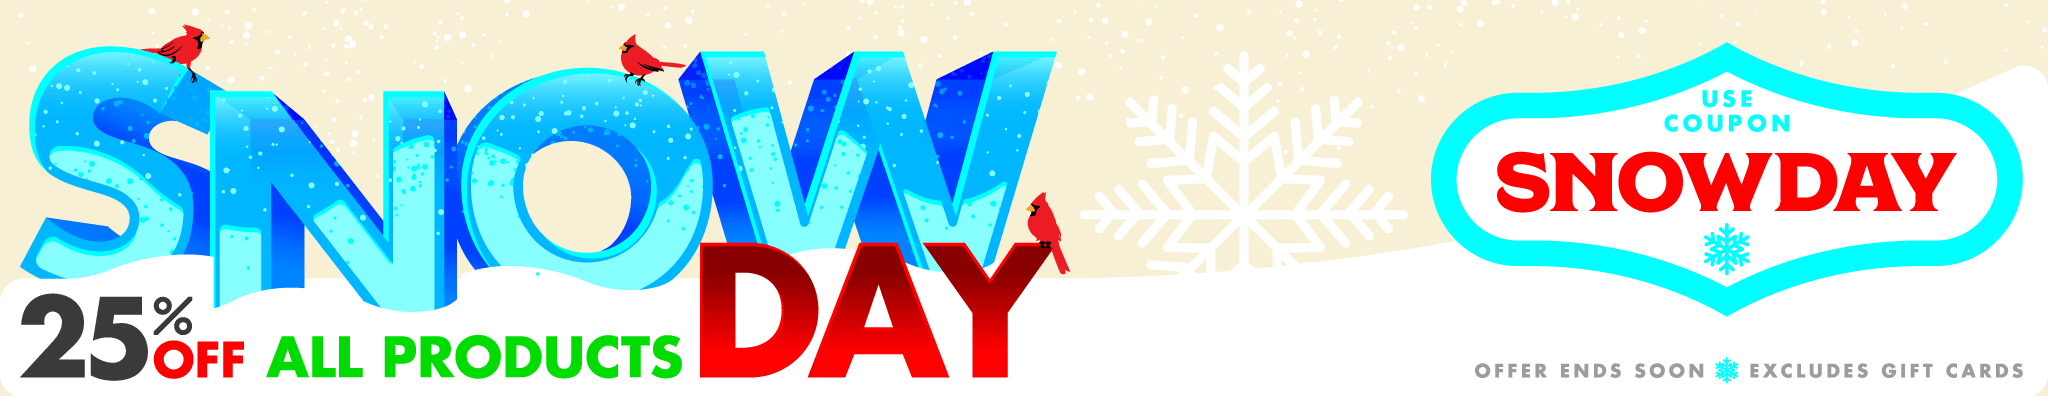 Snow Day Sale 25% OFF all custom products at PureButtons